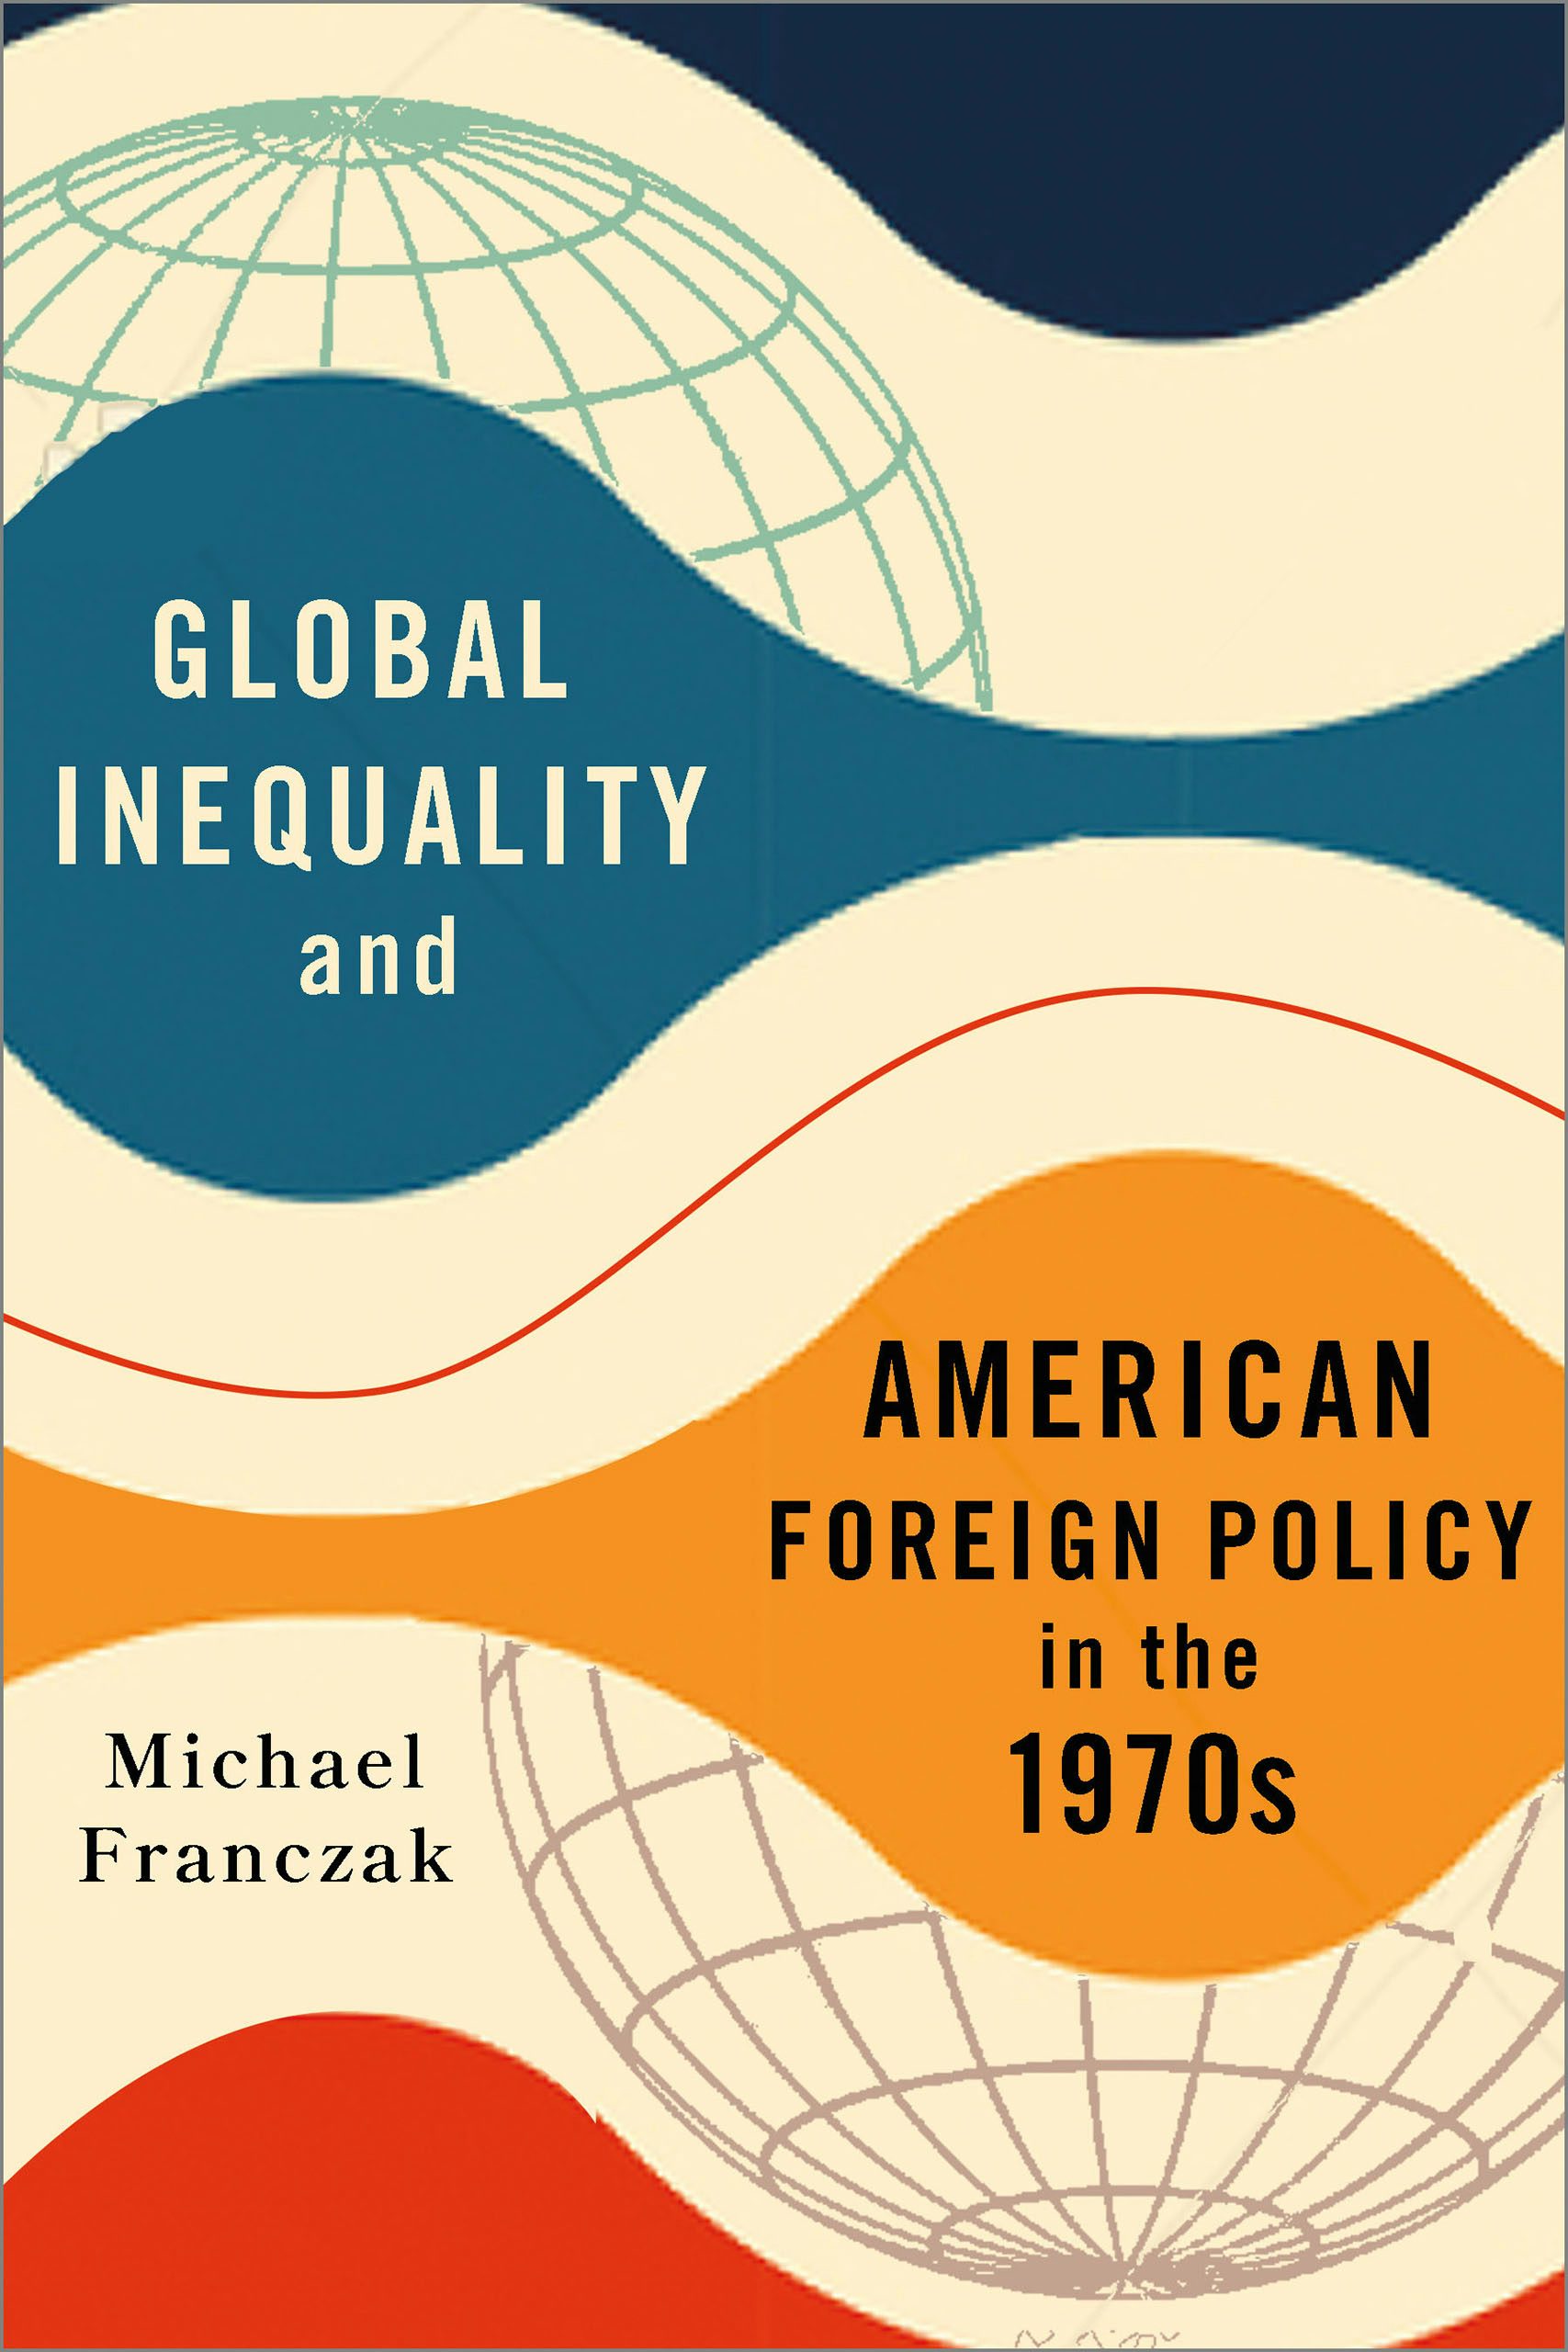 Global Inequality and American Foreign Policy in the 1970s by